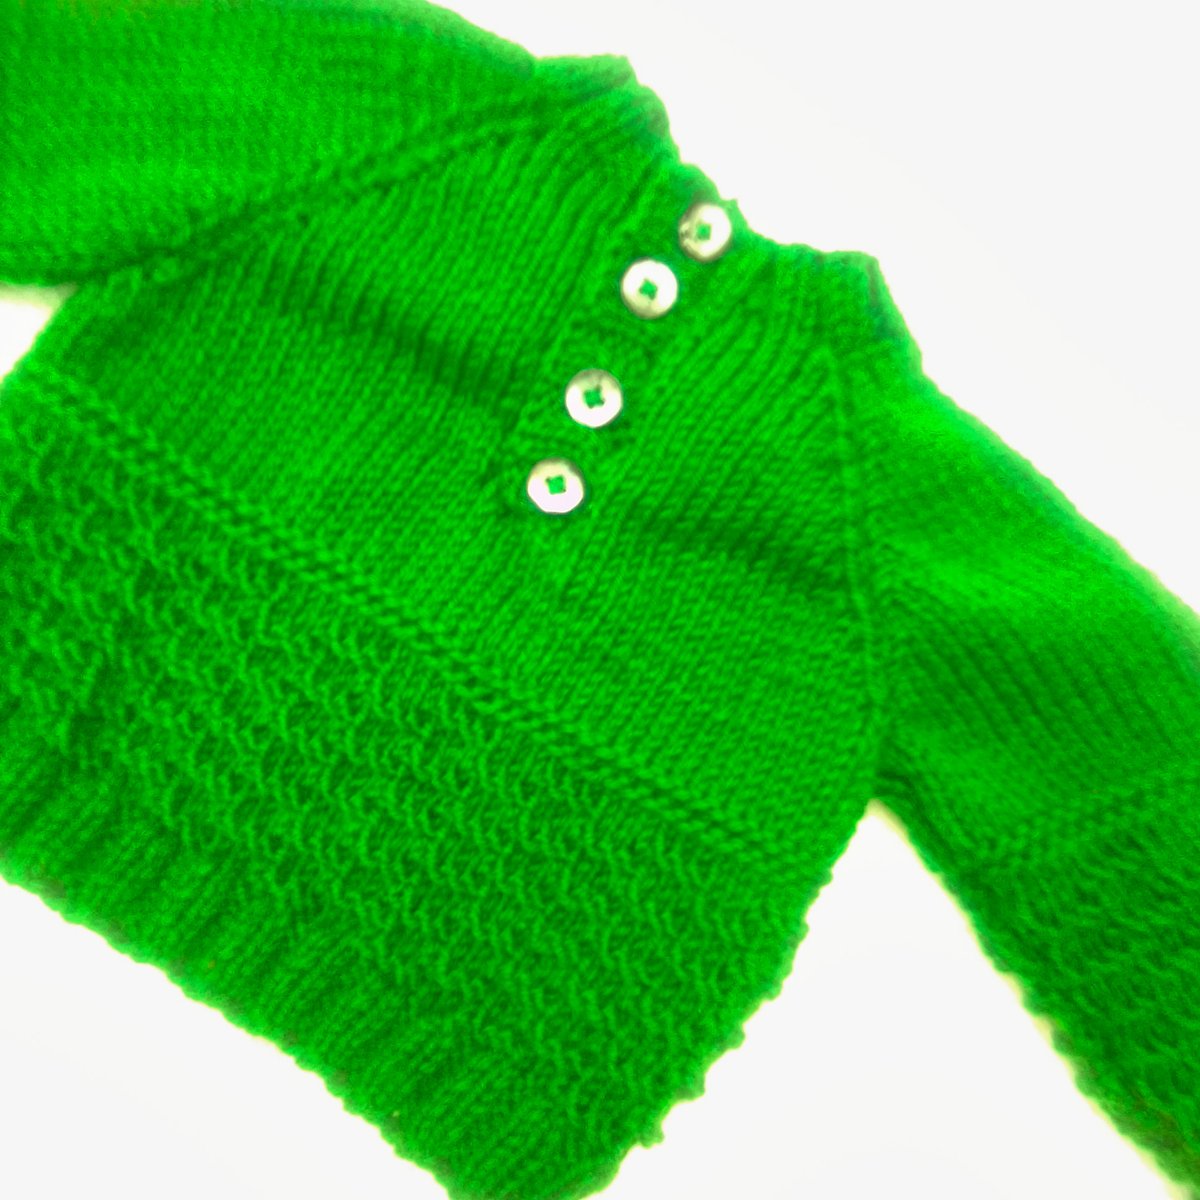 This Baby's Green Textured Jumper with back button fastening can be custom made for you, just tell me the size & colour required. Price from £15 + P&P for a 16/18' chest. folksy.com/items/8319369-… #newonfolksy #folksy365 #creationsfortinytots #babysjumper #babygift #texturedjumper